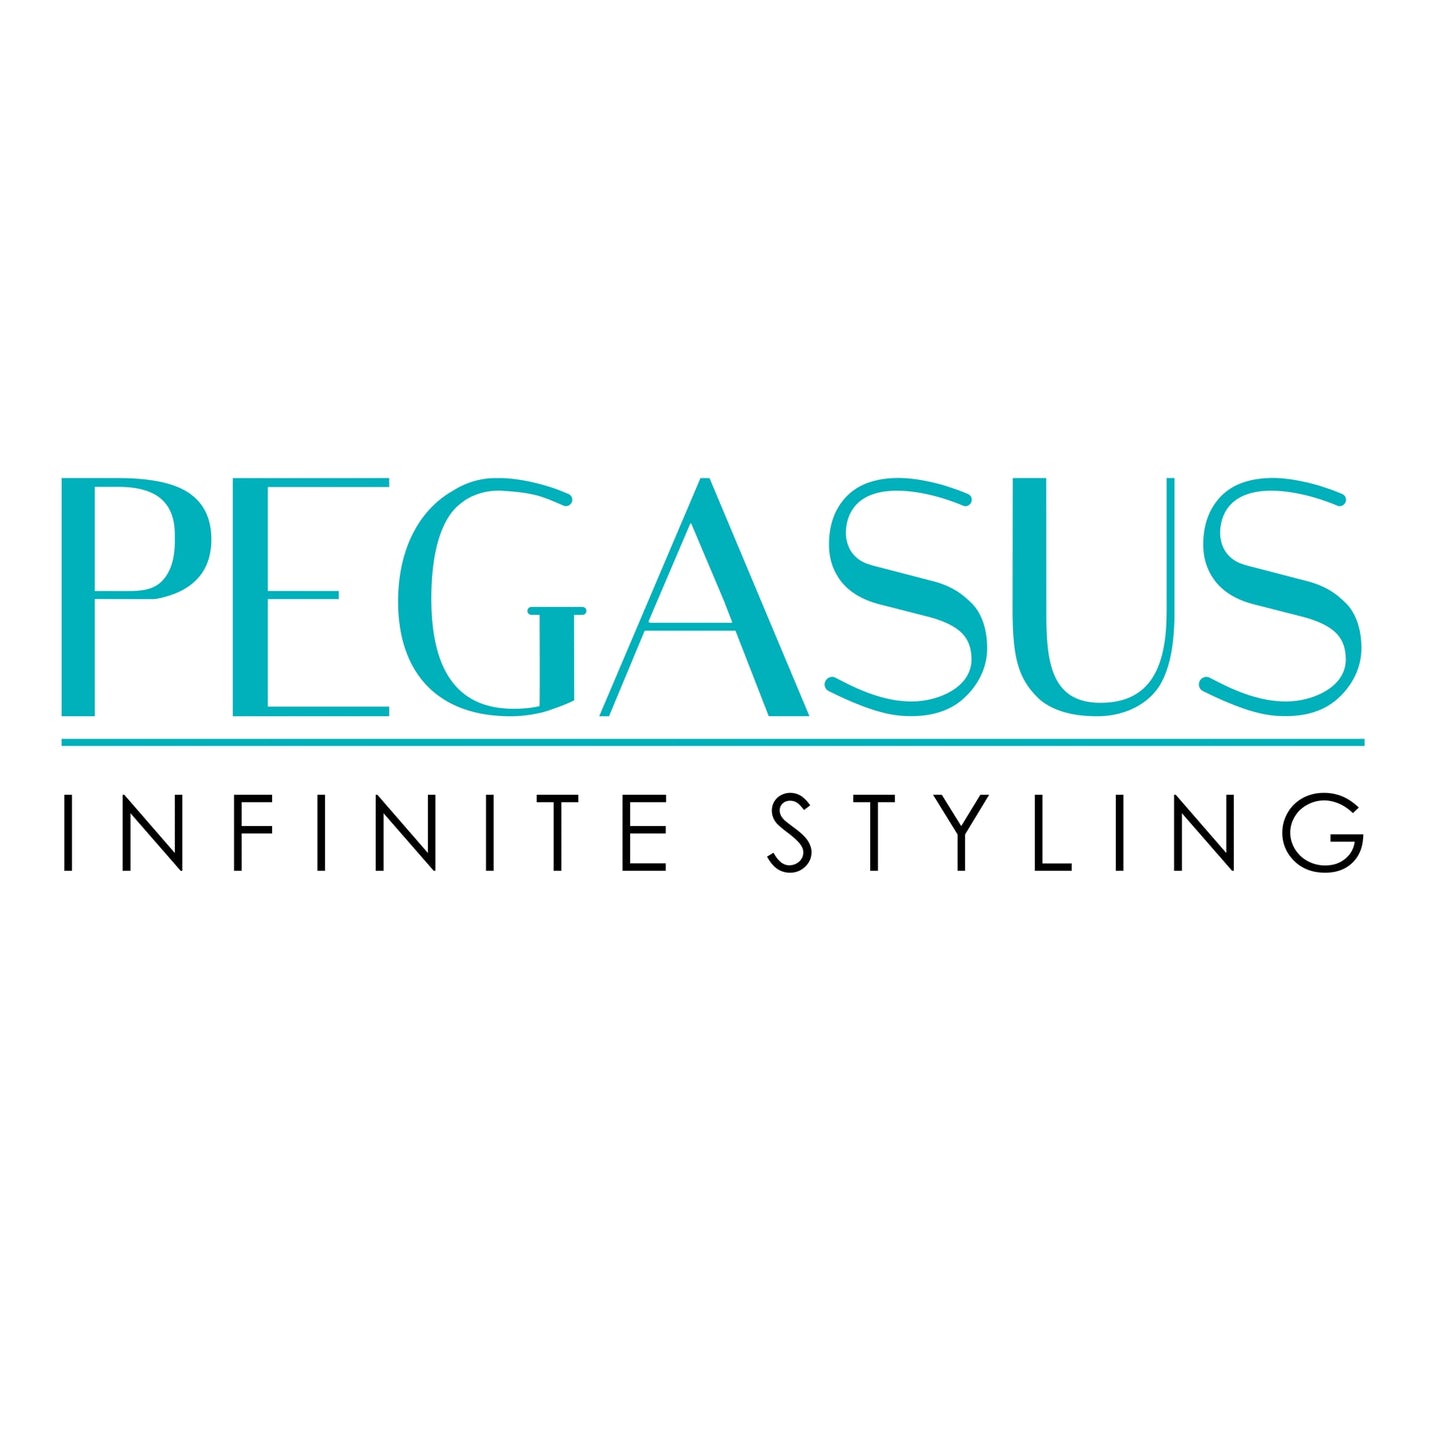 Pegasus 125, 9.75in Hard Rubber Pintail Tease Comb, Smooth Edges, Anti Static, Heat and Chemically Resistant, Stainless Steel Pin, Great for Parting, Coloring Hair | Peines de goma dura - Black